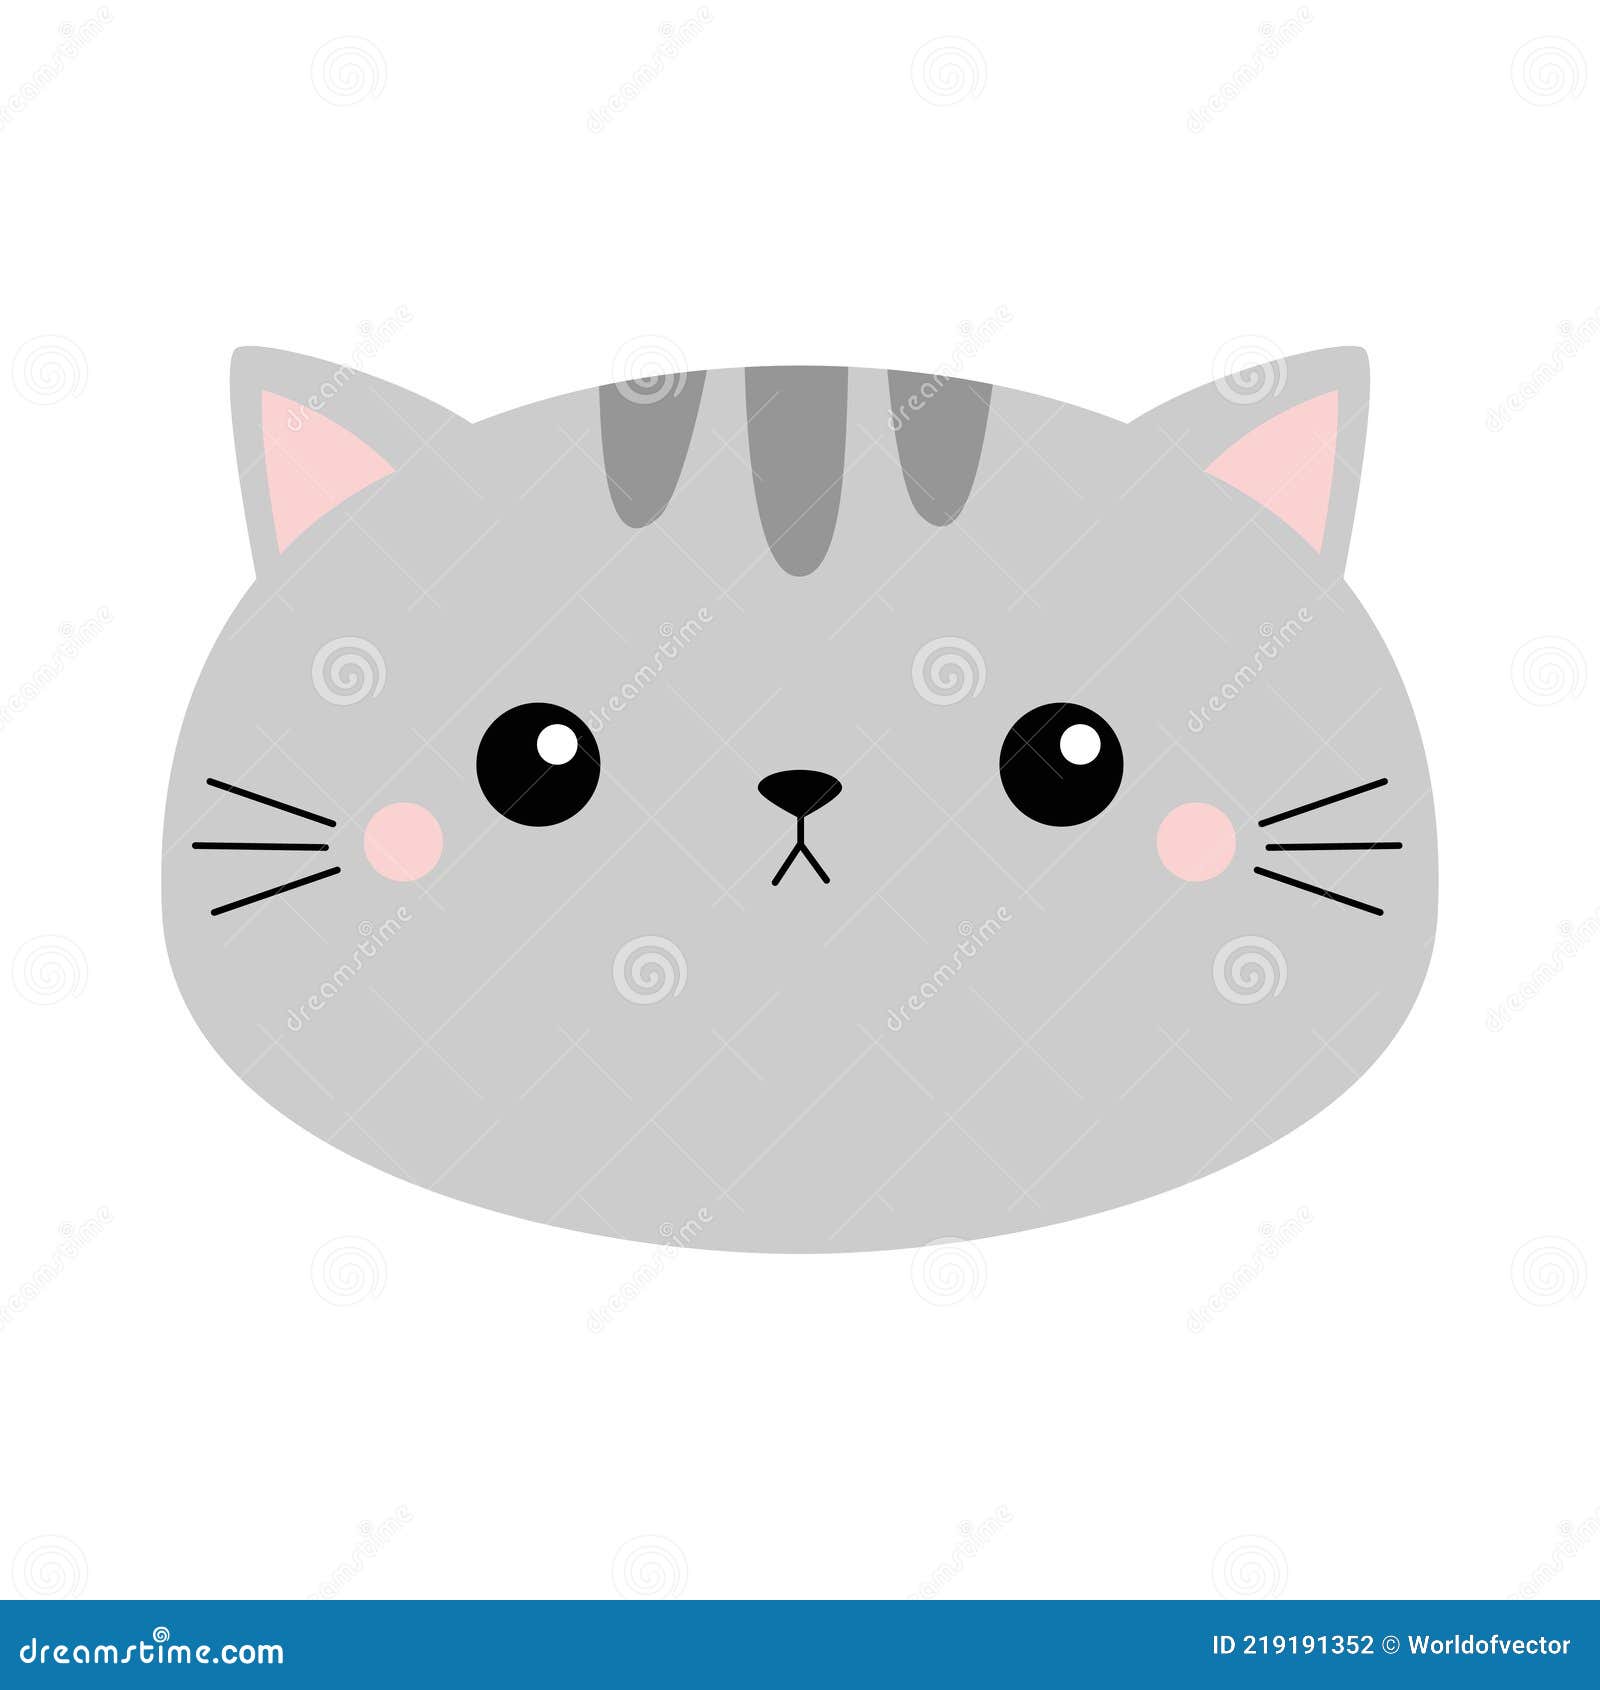 Cute Cat Icon. Gray Kitten Face Head Silhouette. Funny Kawaii Cartoon Baby  Character. Happy Valentines Day Stock Vector - Illustration of meow,  halloween: 219191352